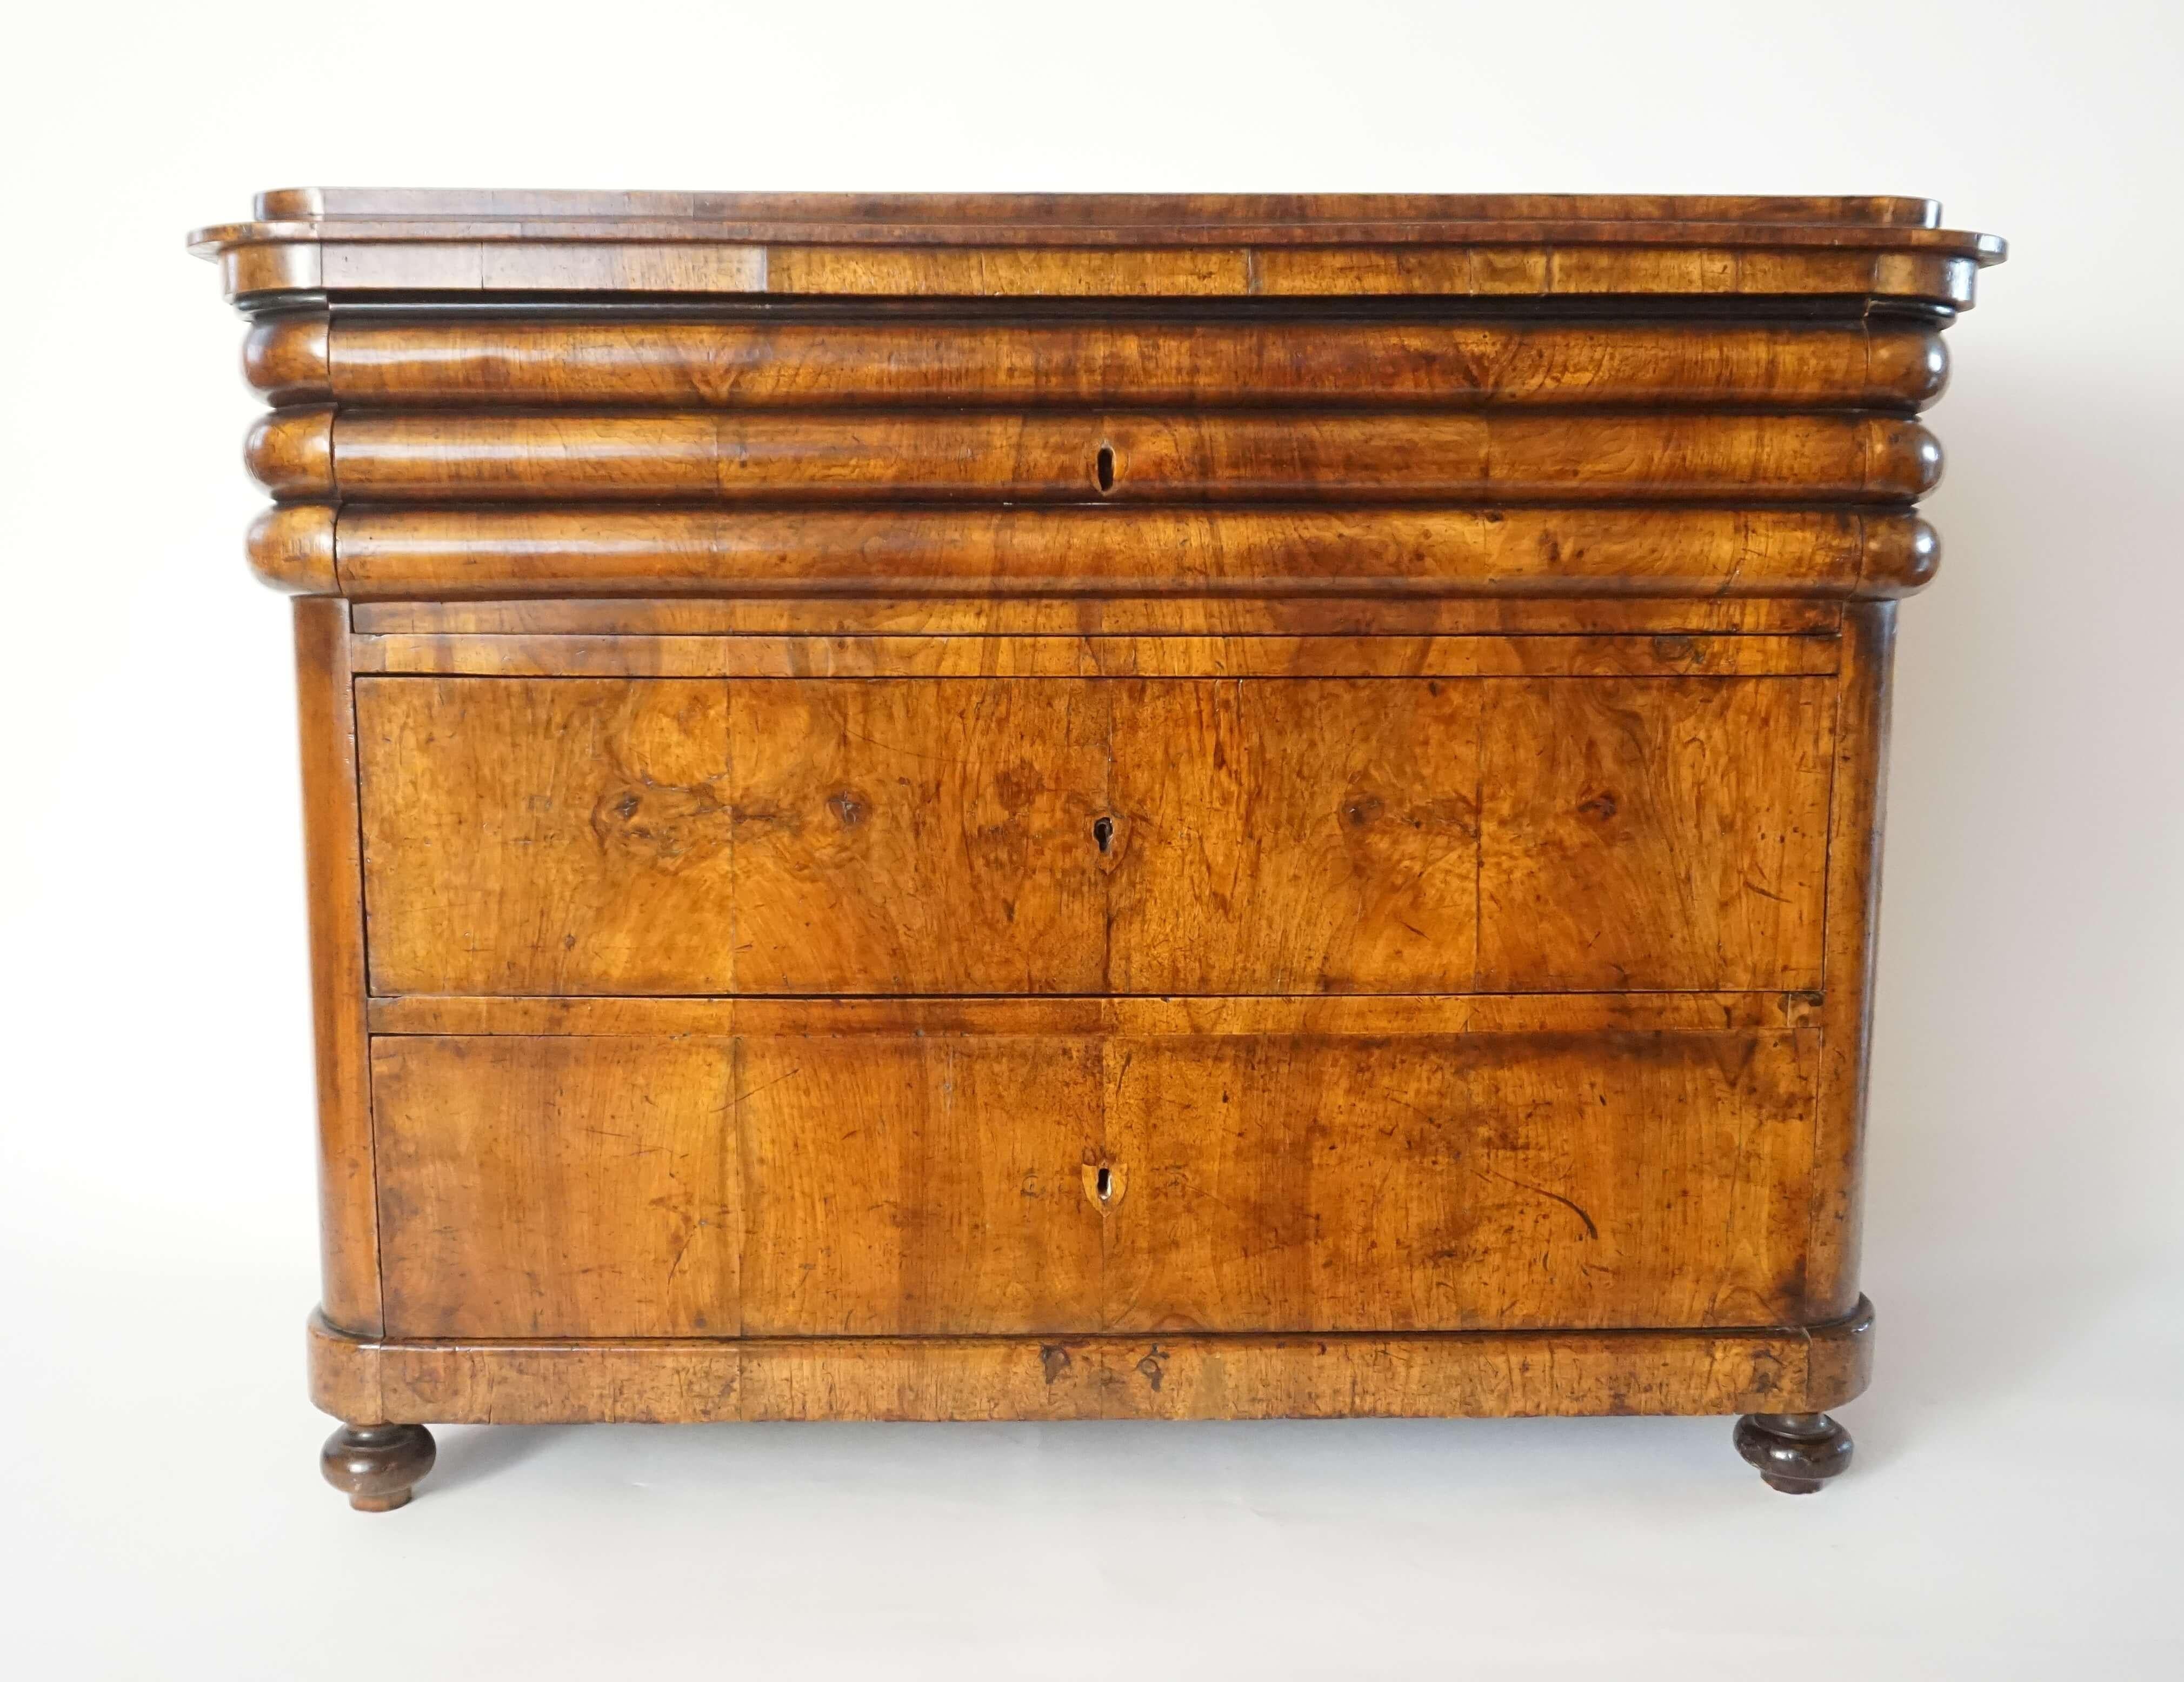 Highly unusual circa 1840 Austrian Biedermeier three-drawer commode or chest having walnut veneered D-form rectangular case; the stepped plinth-form top having rounded corners surmounting unique three-row 'tubular band' with concealed top drawer